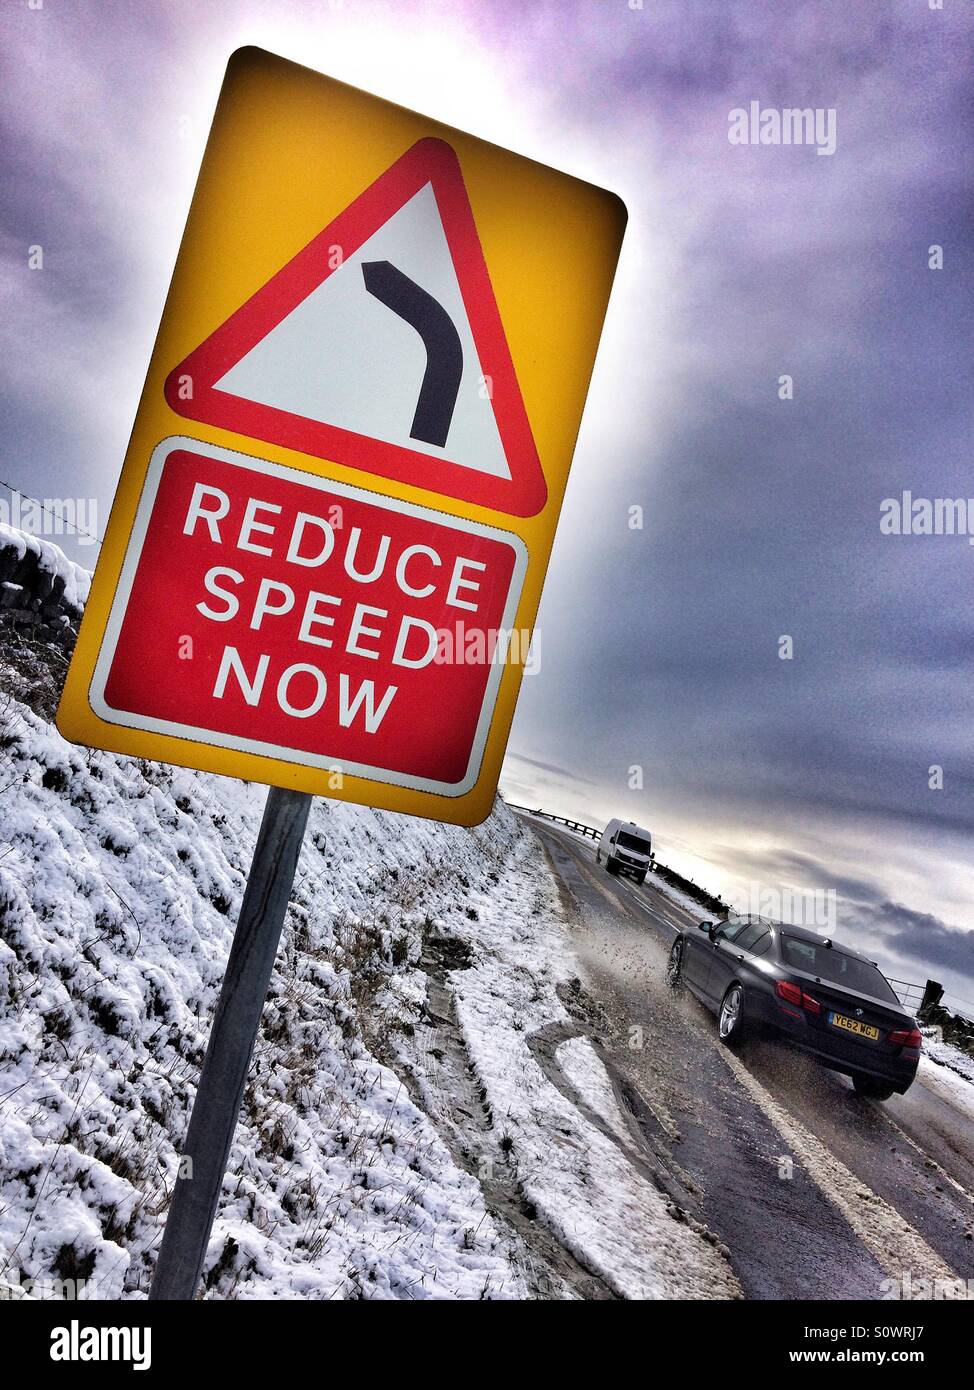 Driving in snow reduce speed bend ahead Stock Photo